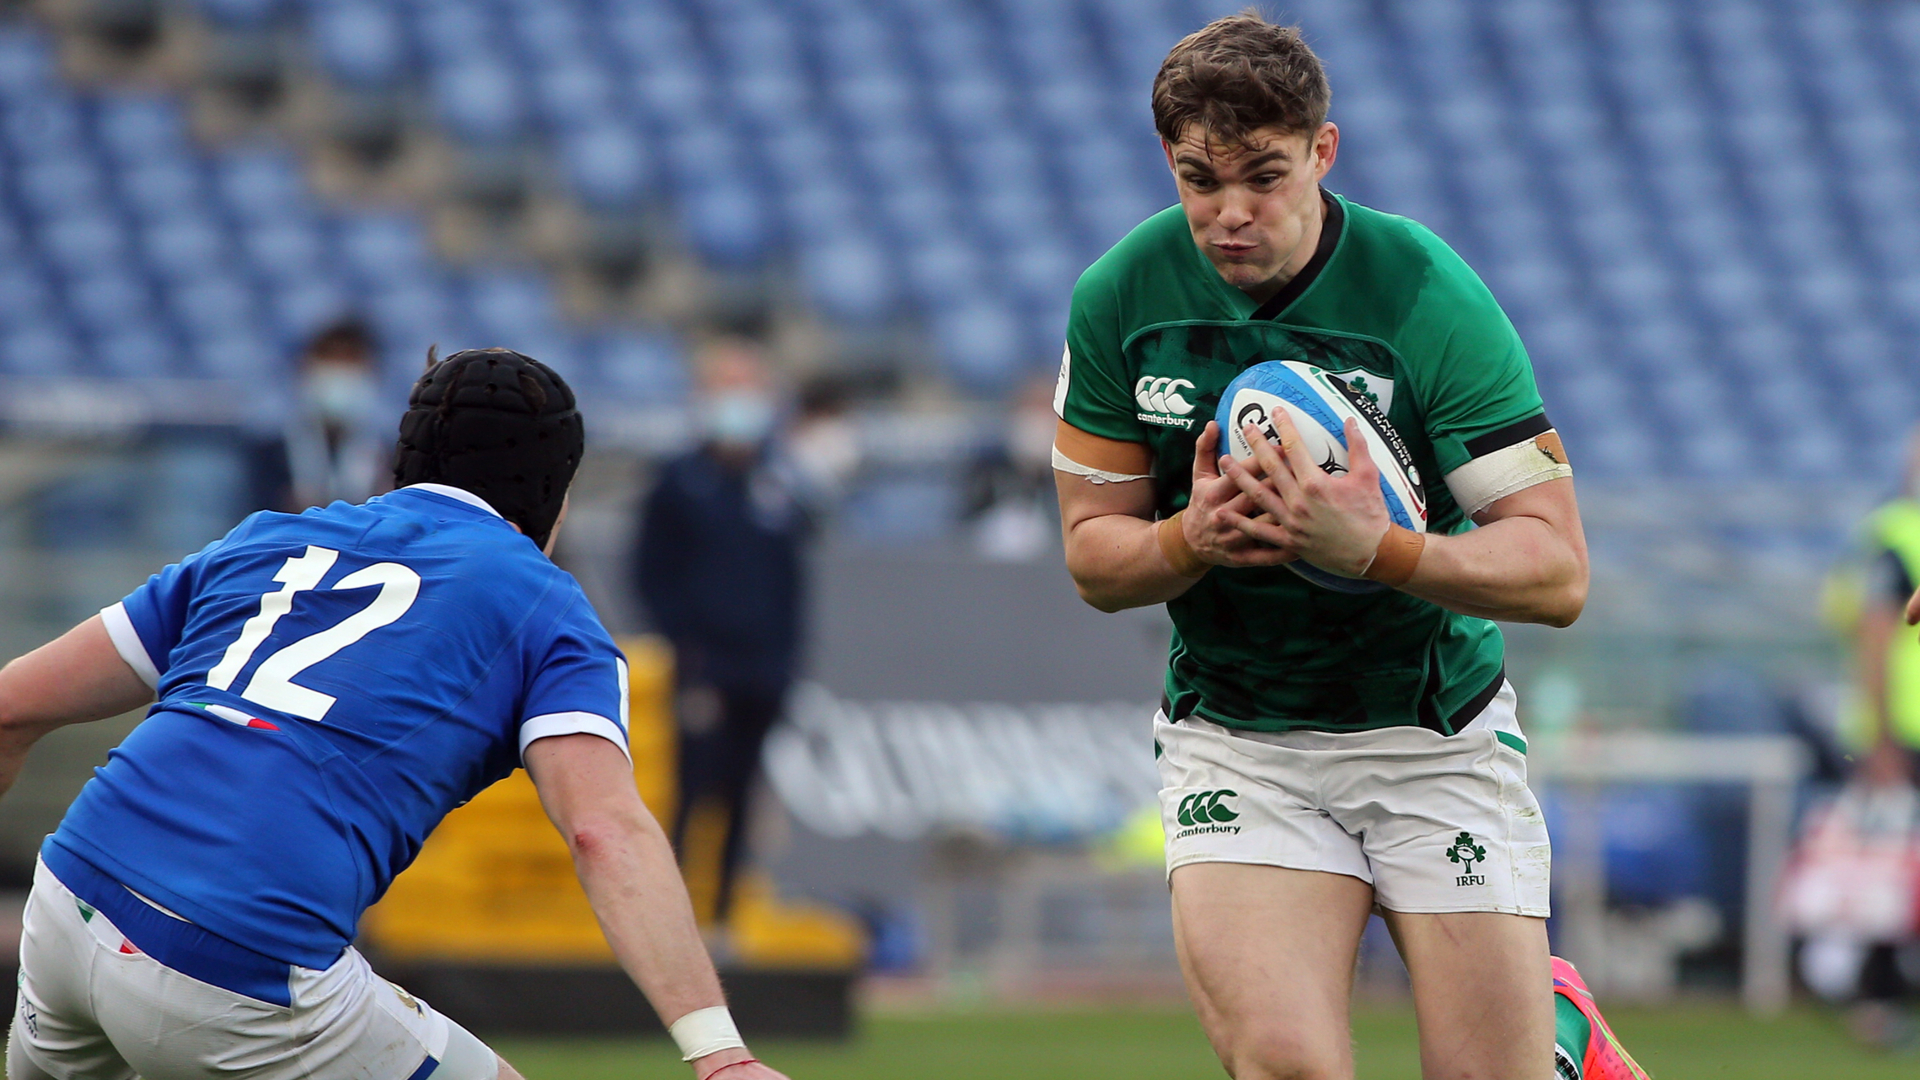 Ireland and Italy playing in a Six Nations rugby match